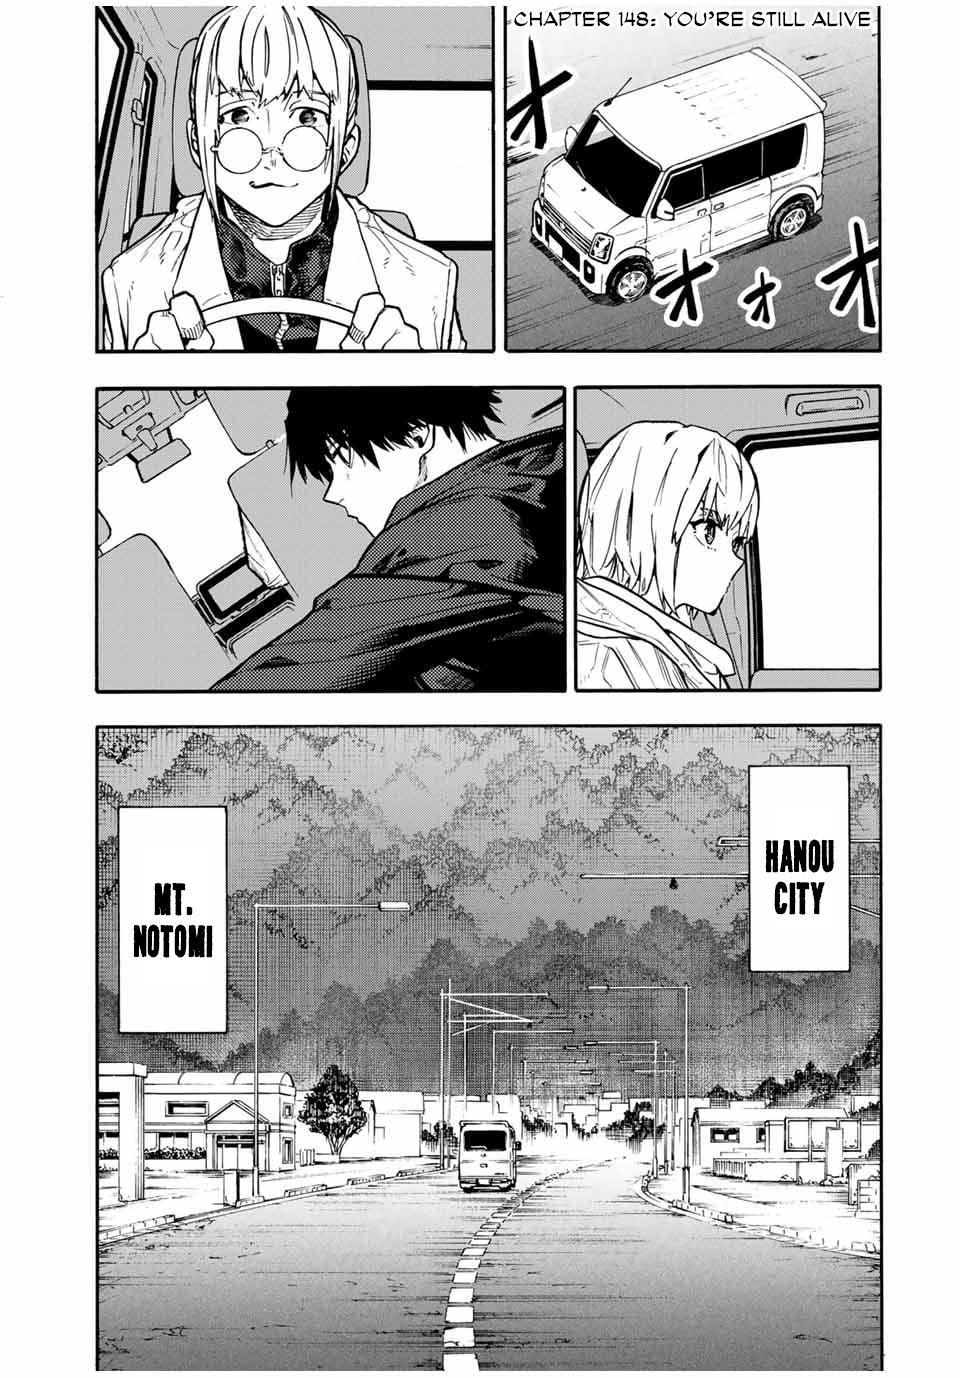 Chainsaw Man Chapter 148